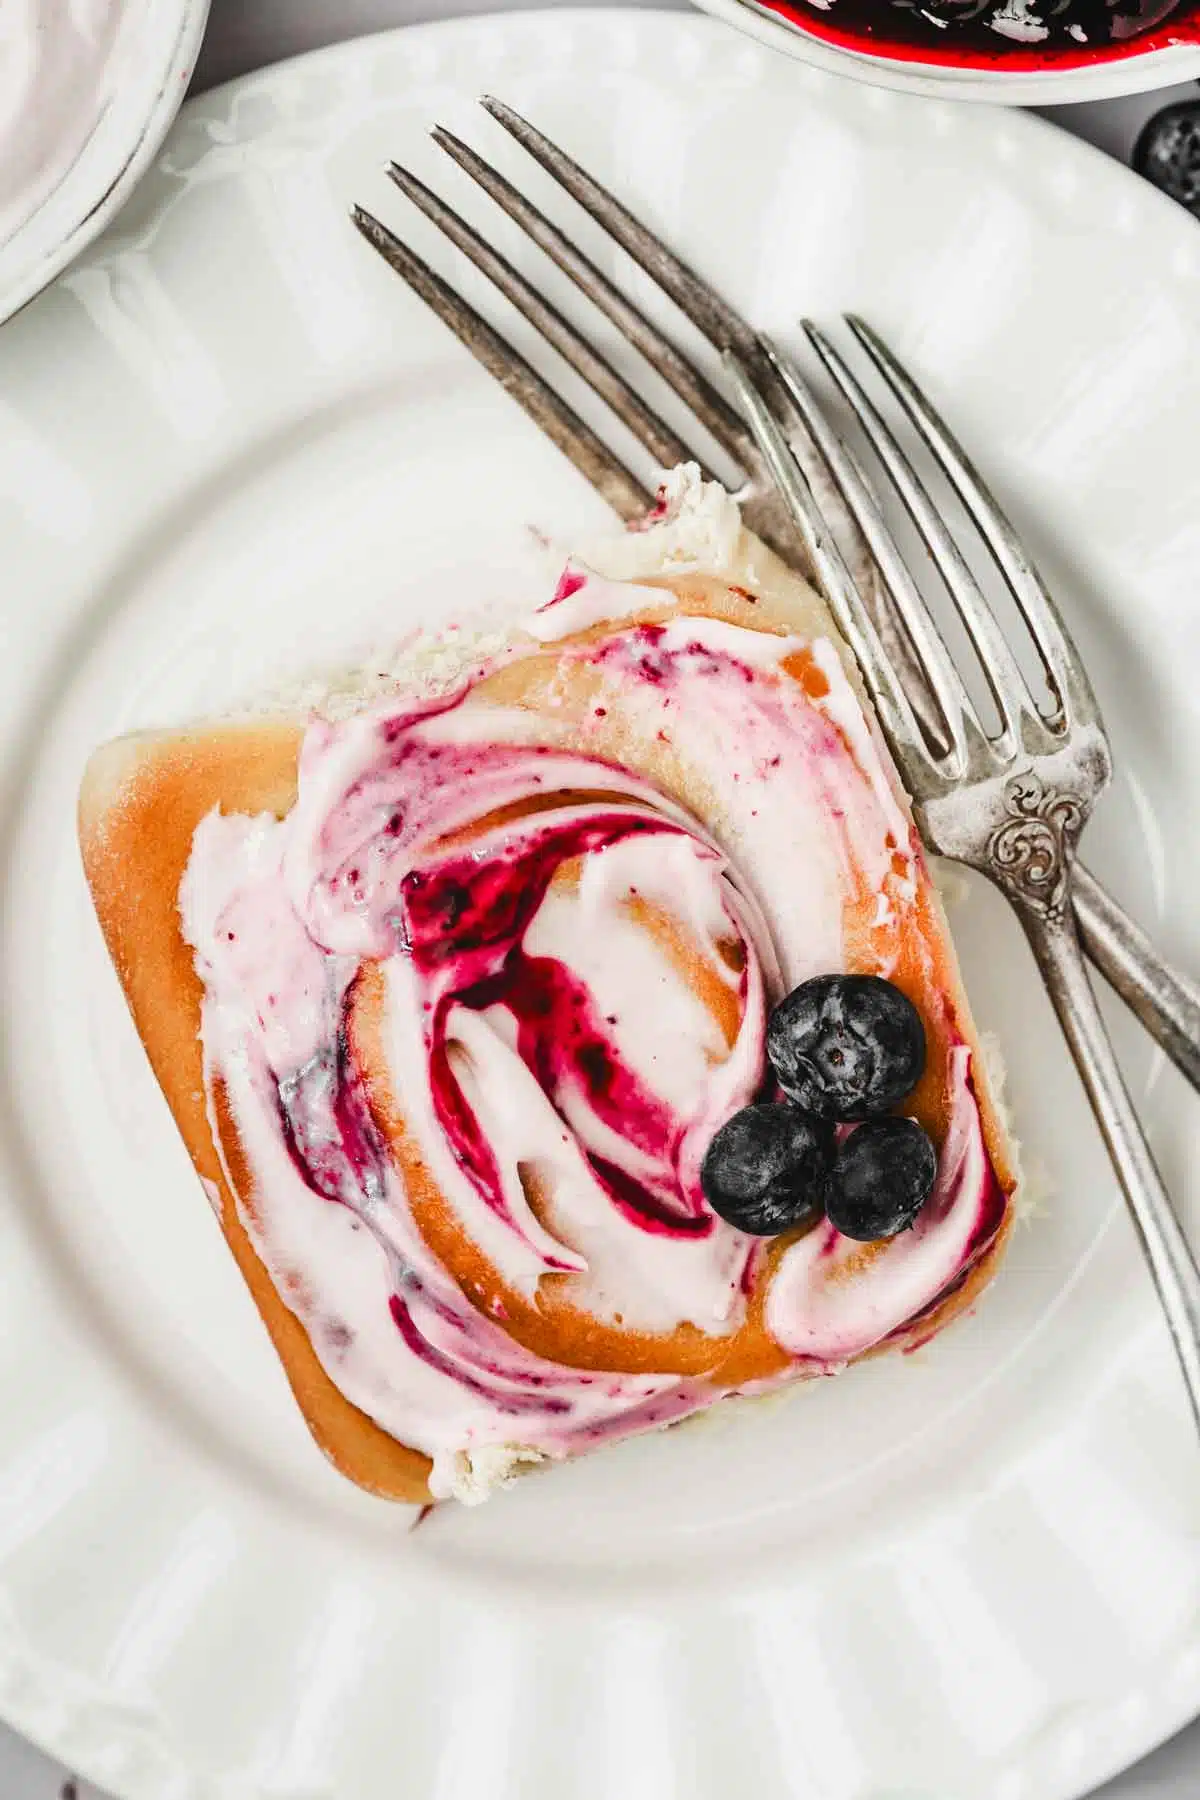 plate with a blueberry sweet roll